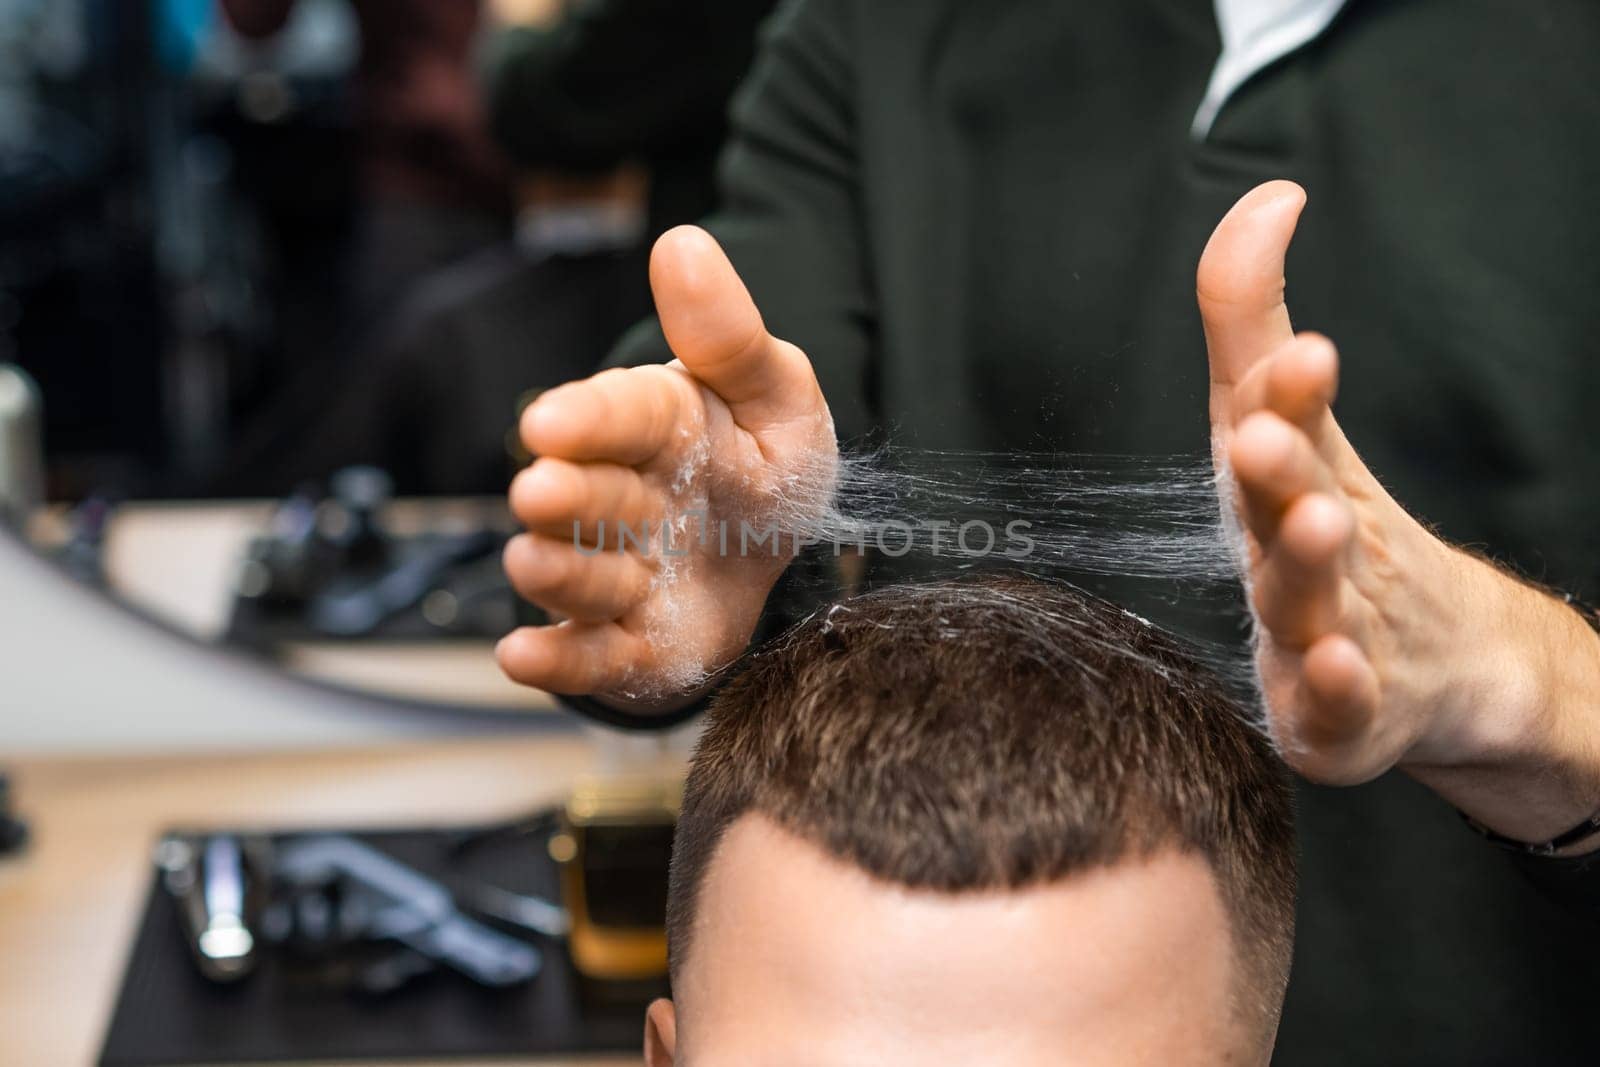 Barber expertly styling a clients hair with skilled hands in the barbershop.